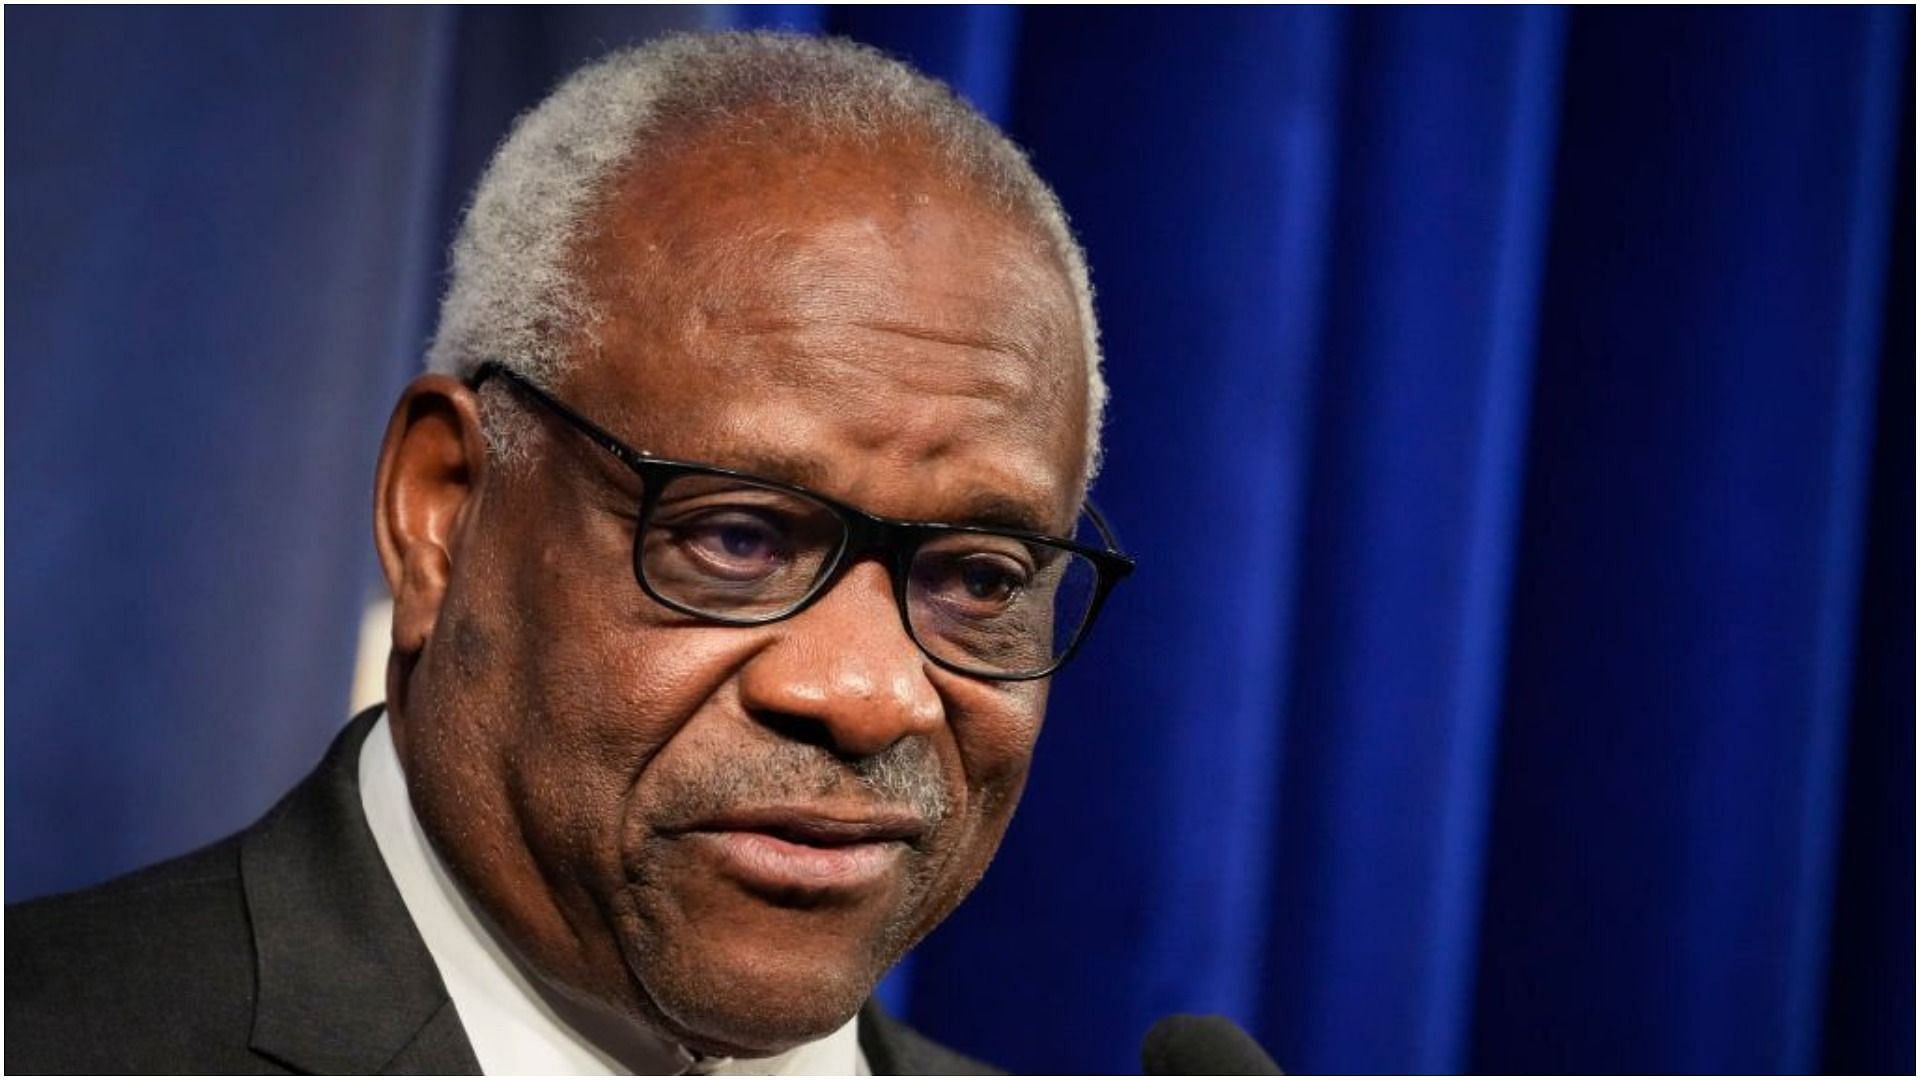 Justice Clarence Thomas was hospitalized with flu-like symptoms (Image via Getty Images/Drew Angerer)